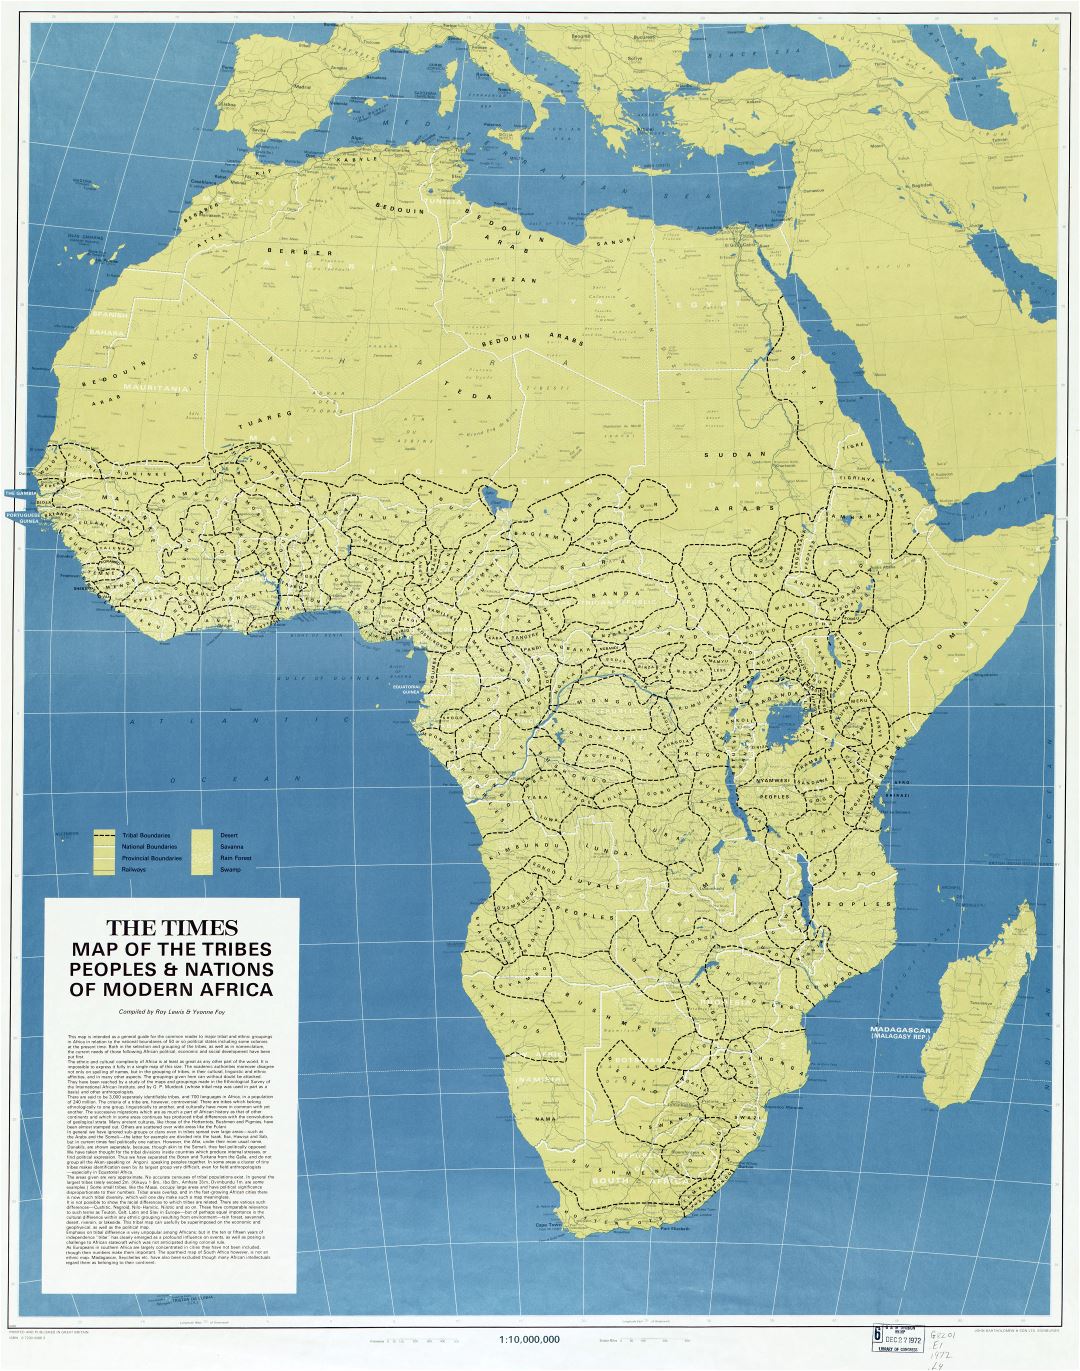 Large scale detailed map of the tribes, peoples, & nations of modern Africa - 1972